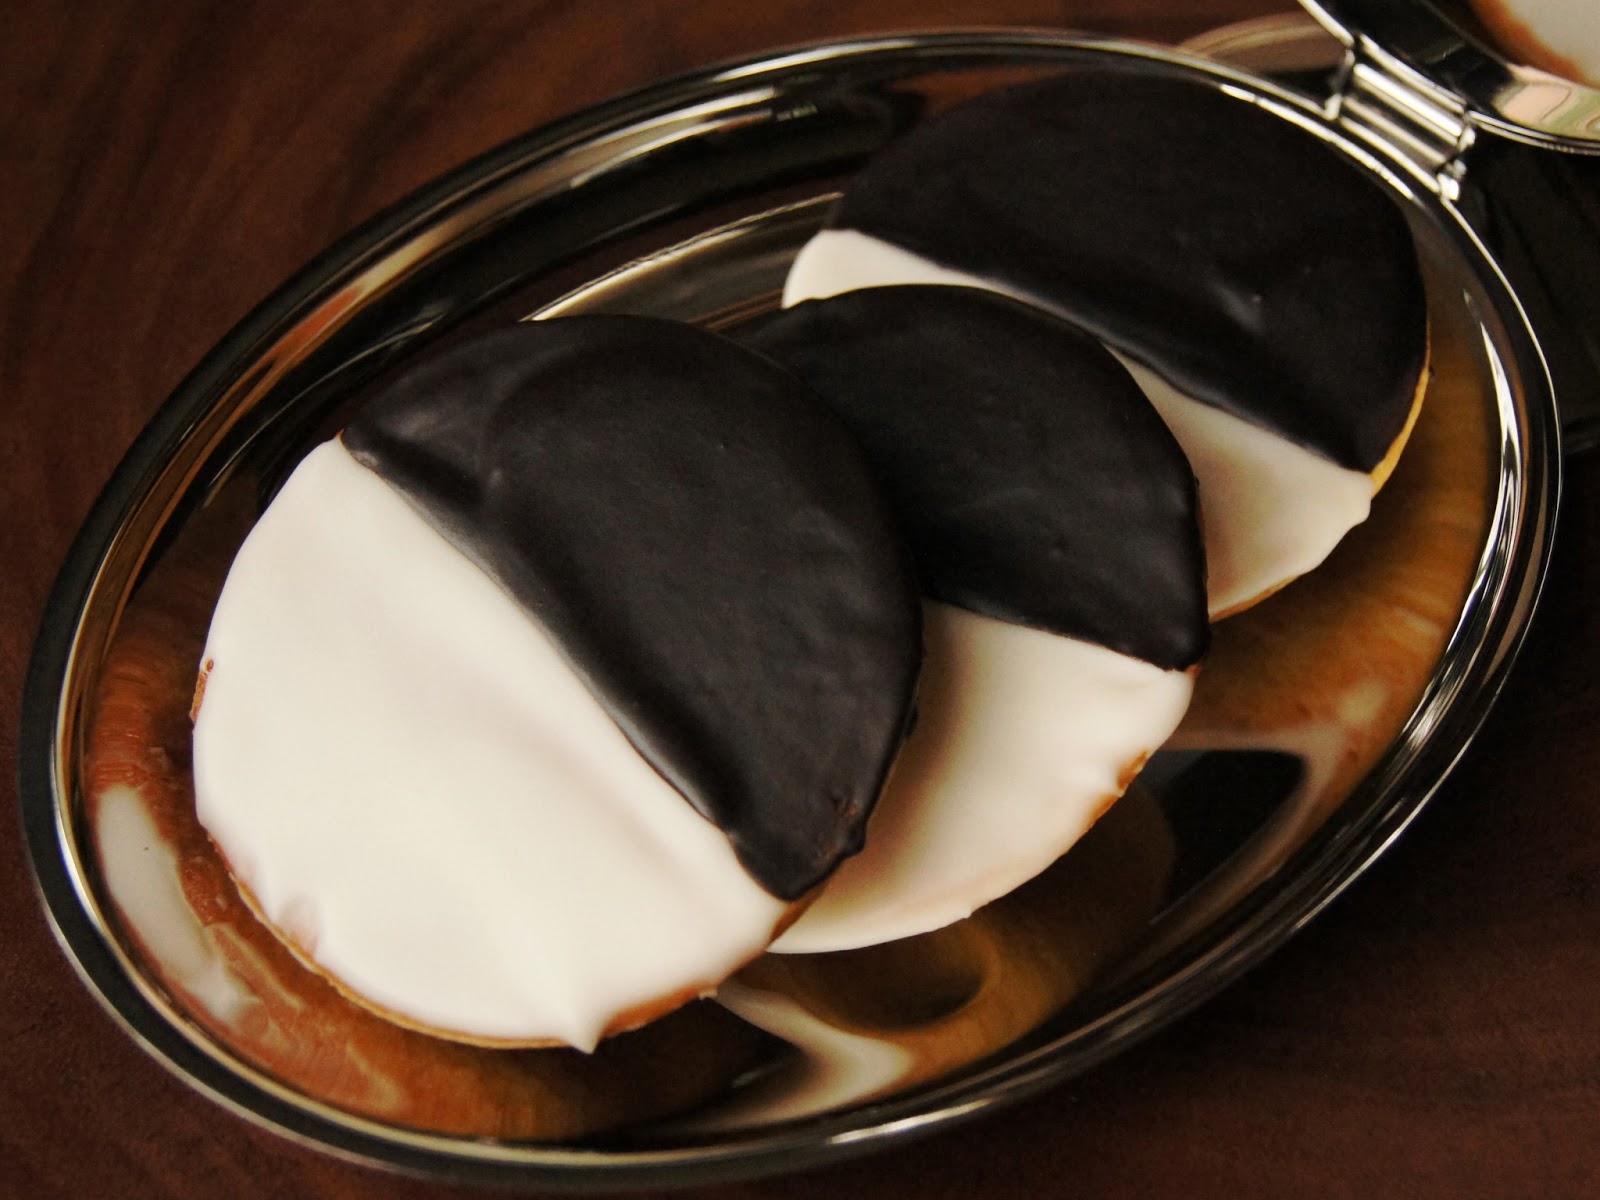 Baked Sunday Mornings: Black and White Cookies